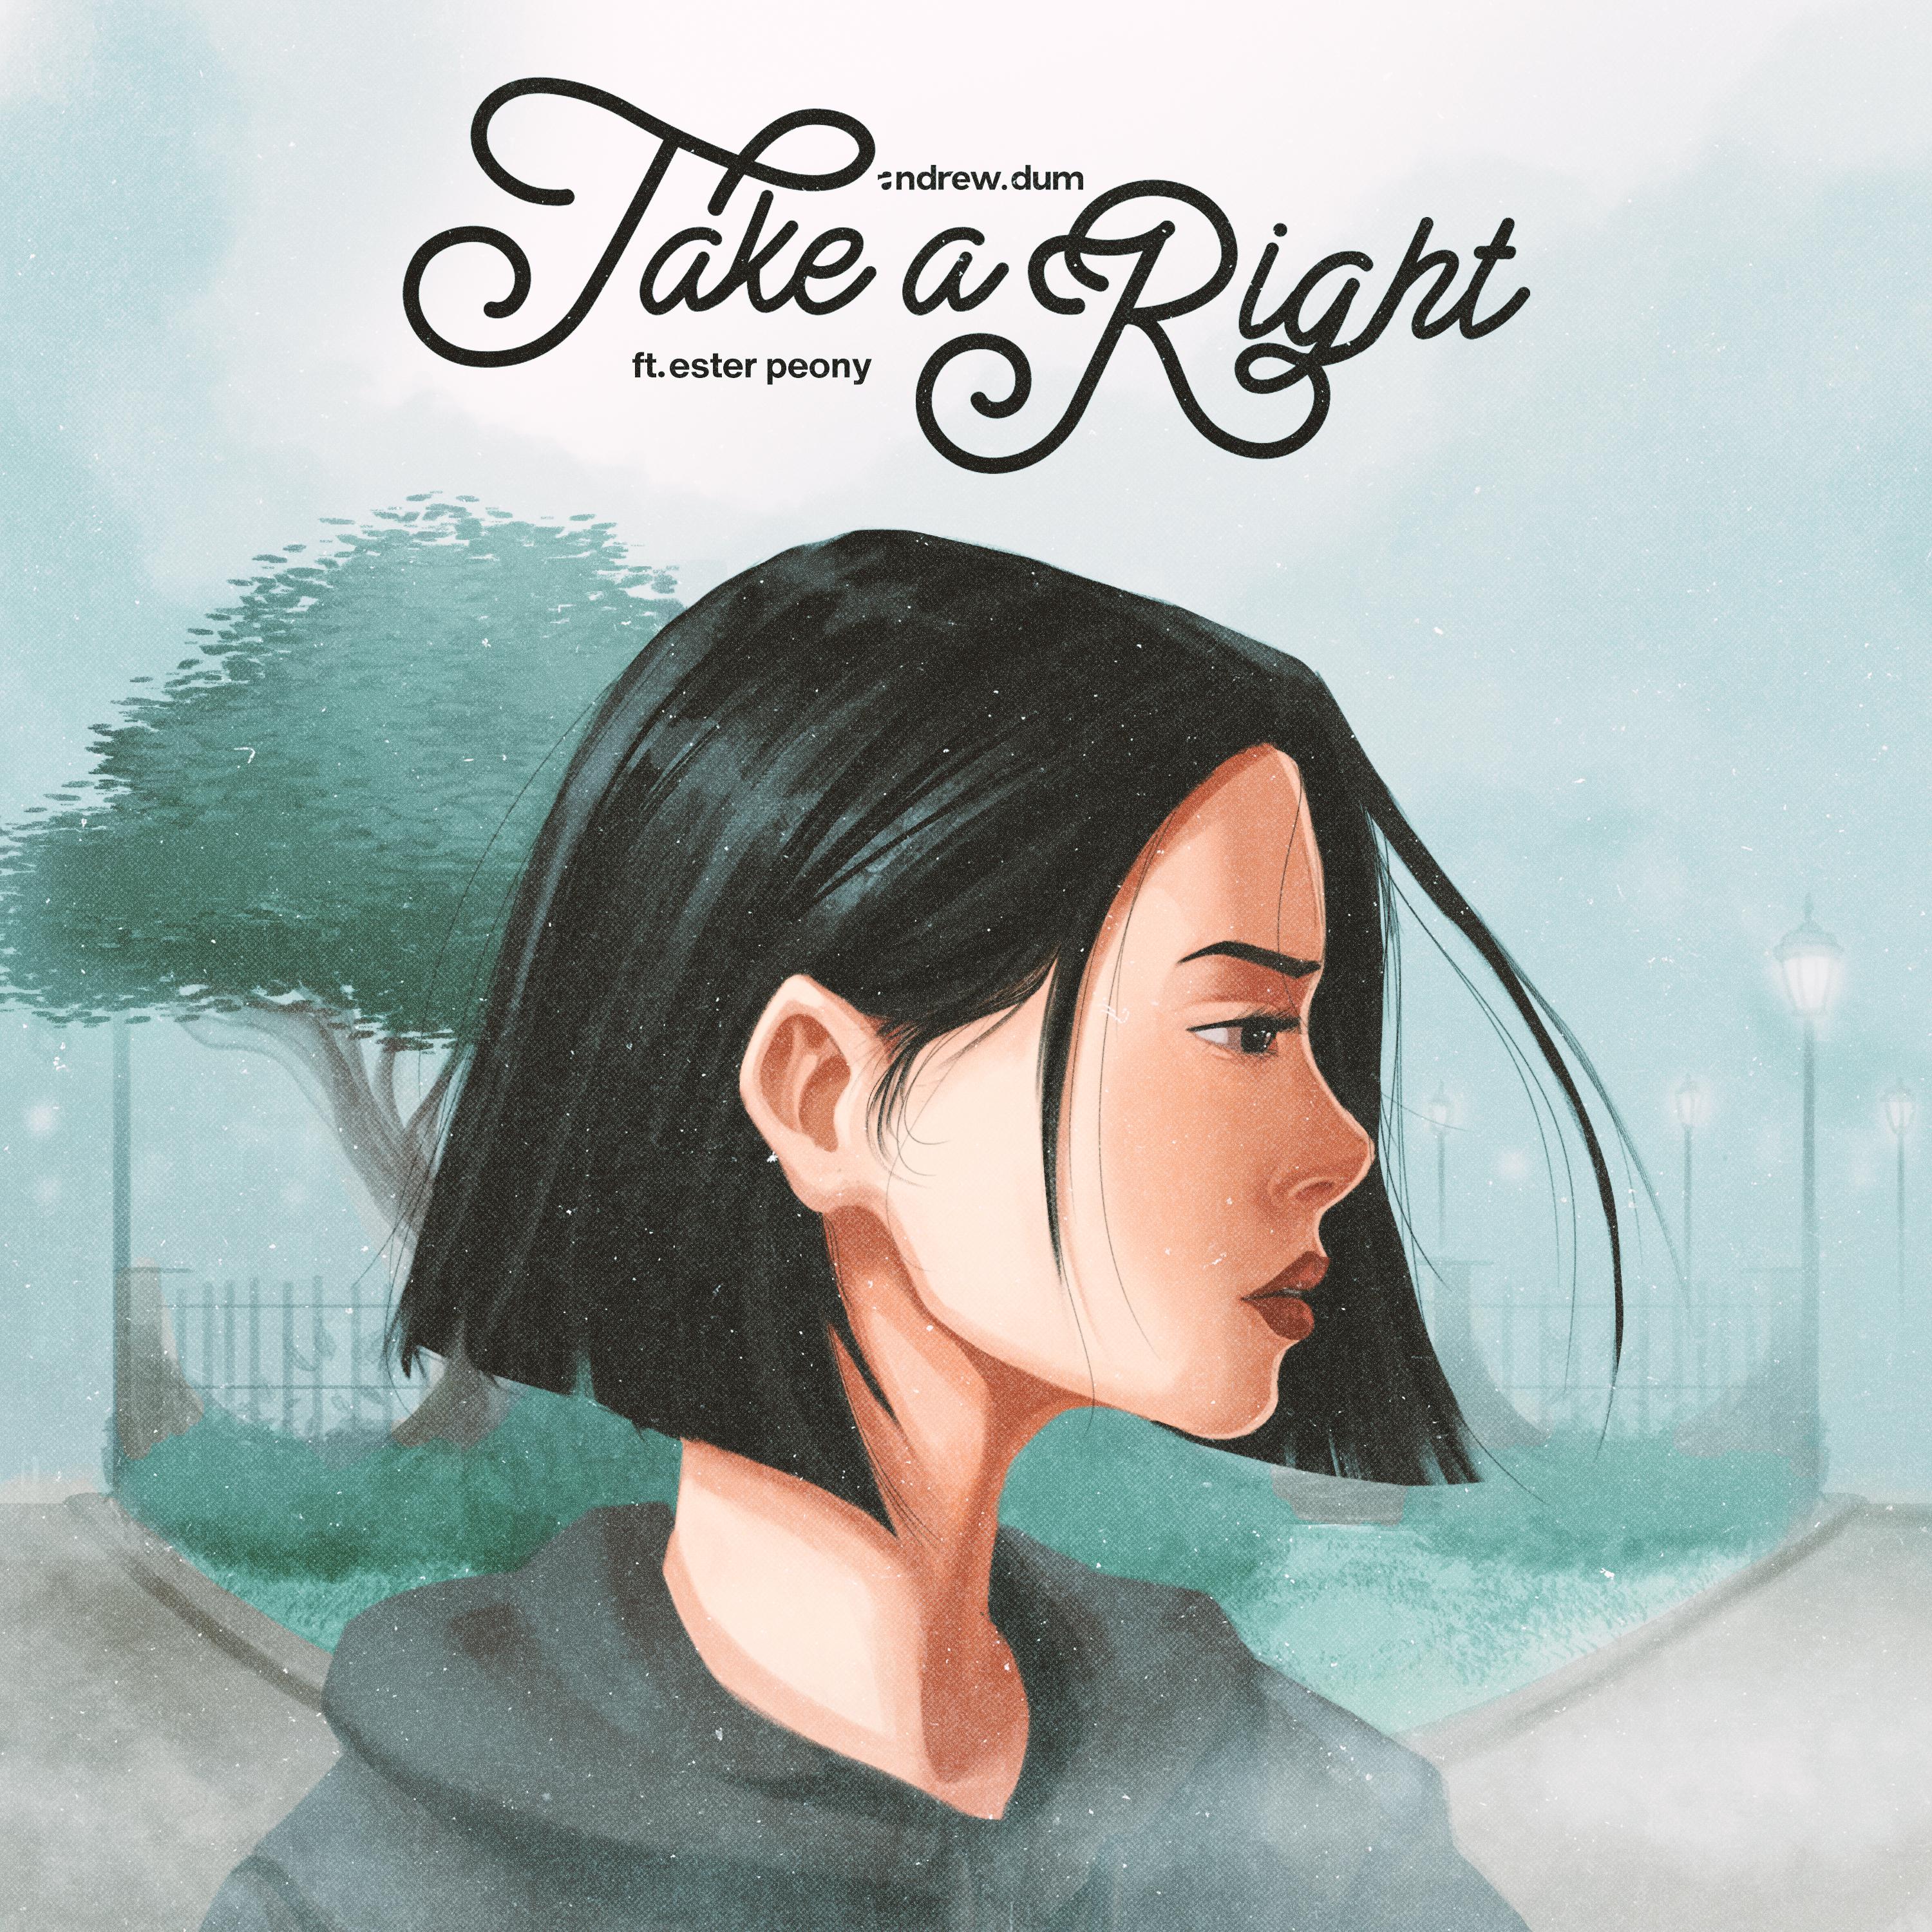 Andrew Dum, Ester Peony - Take a Right